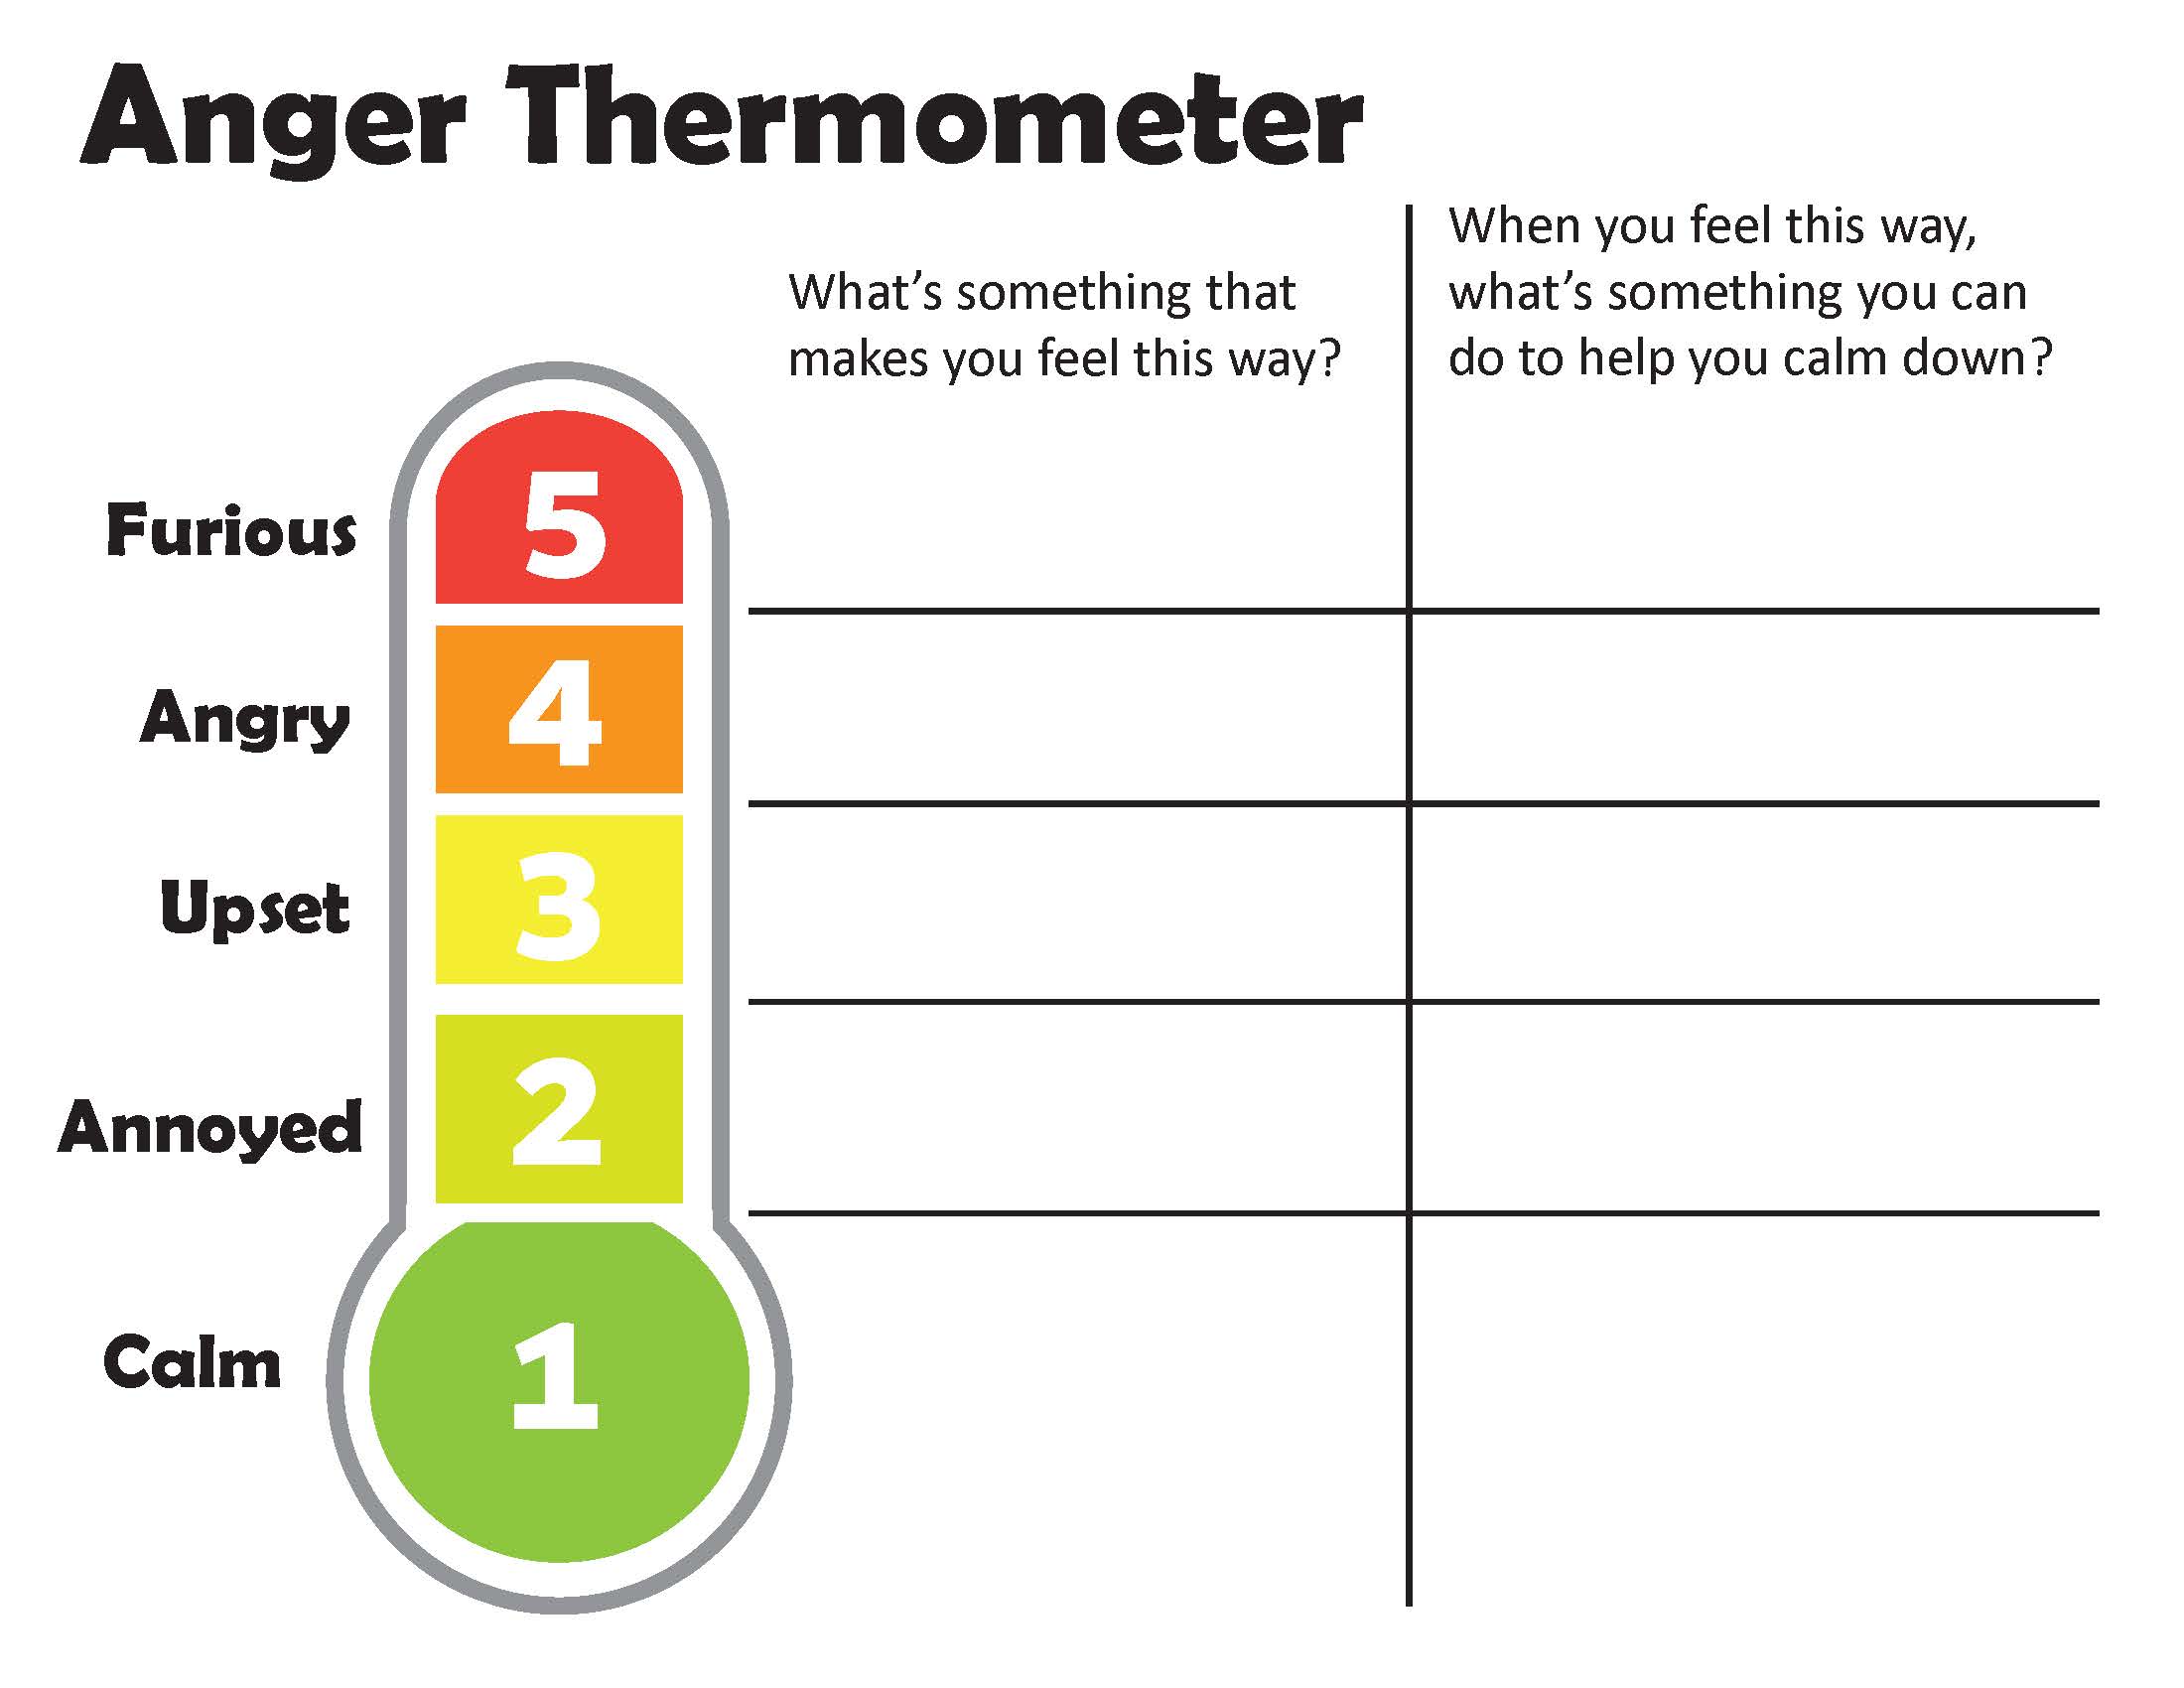 Thermometer handout encourages people to check for safe